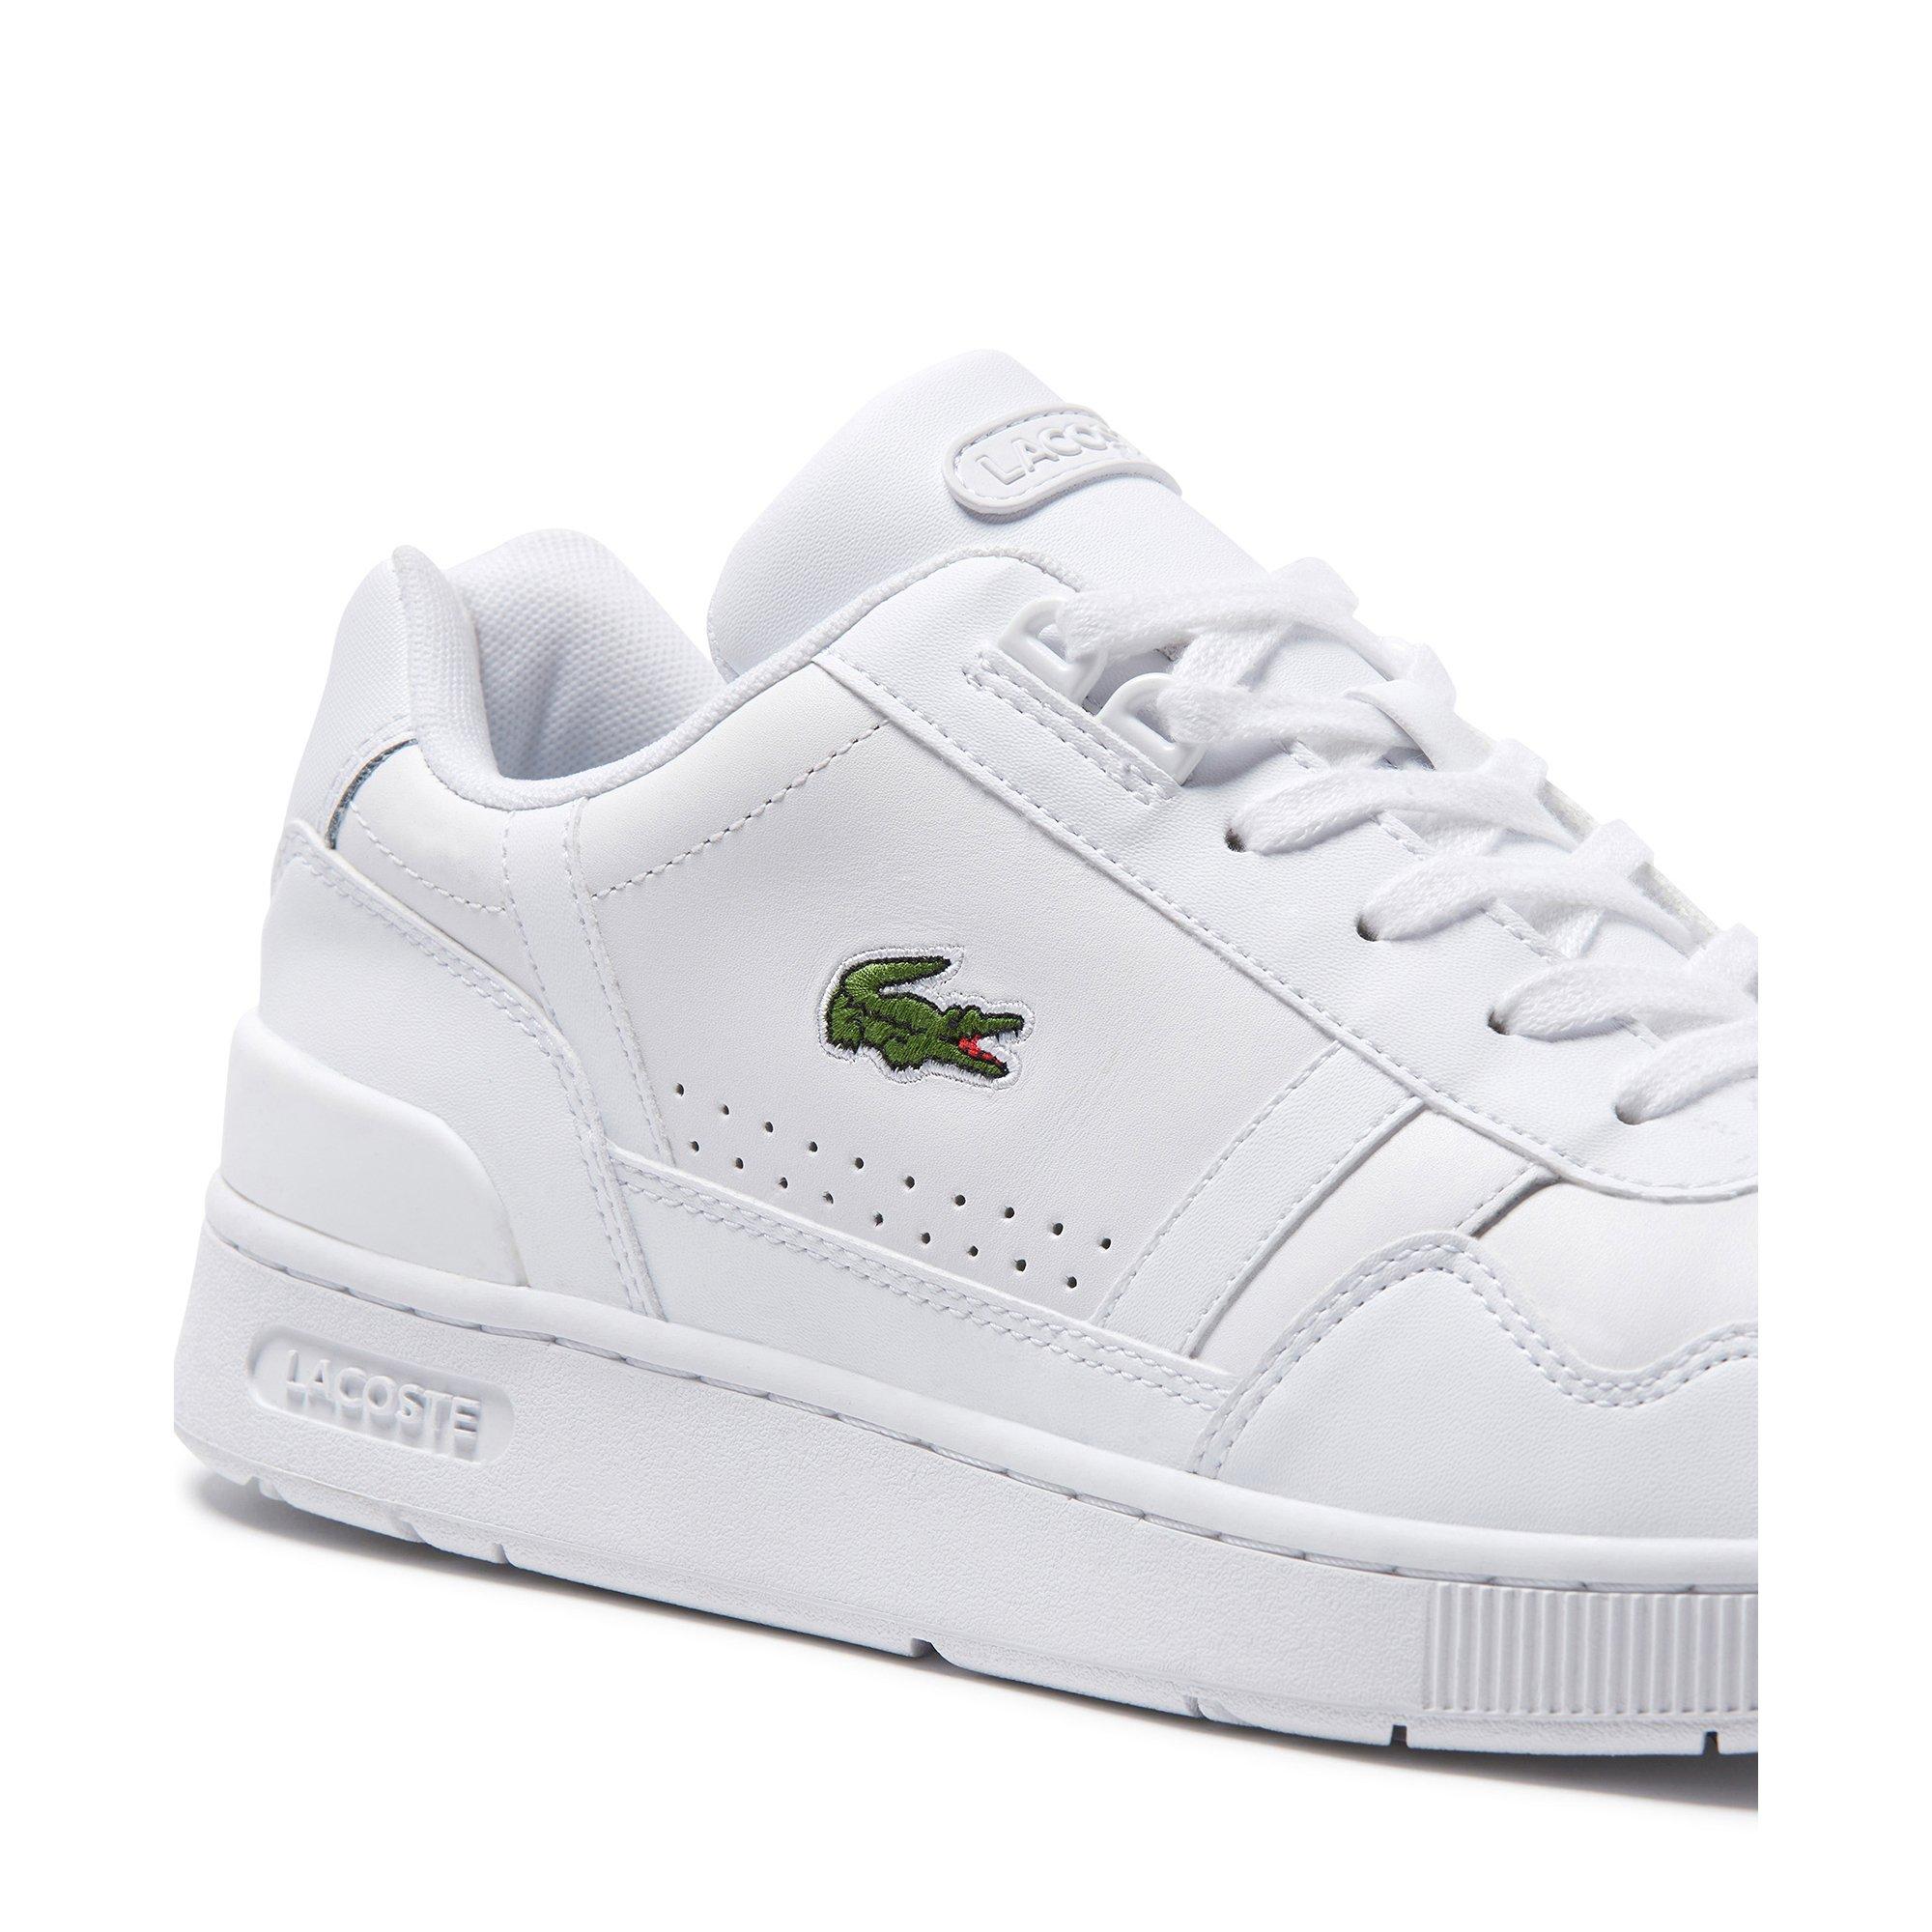 LACOSTE T-Clip Sneakers, Low Top 